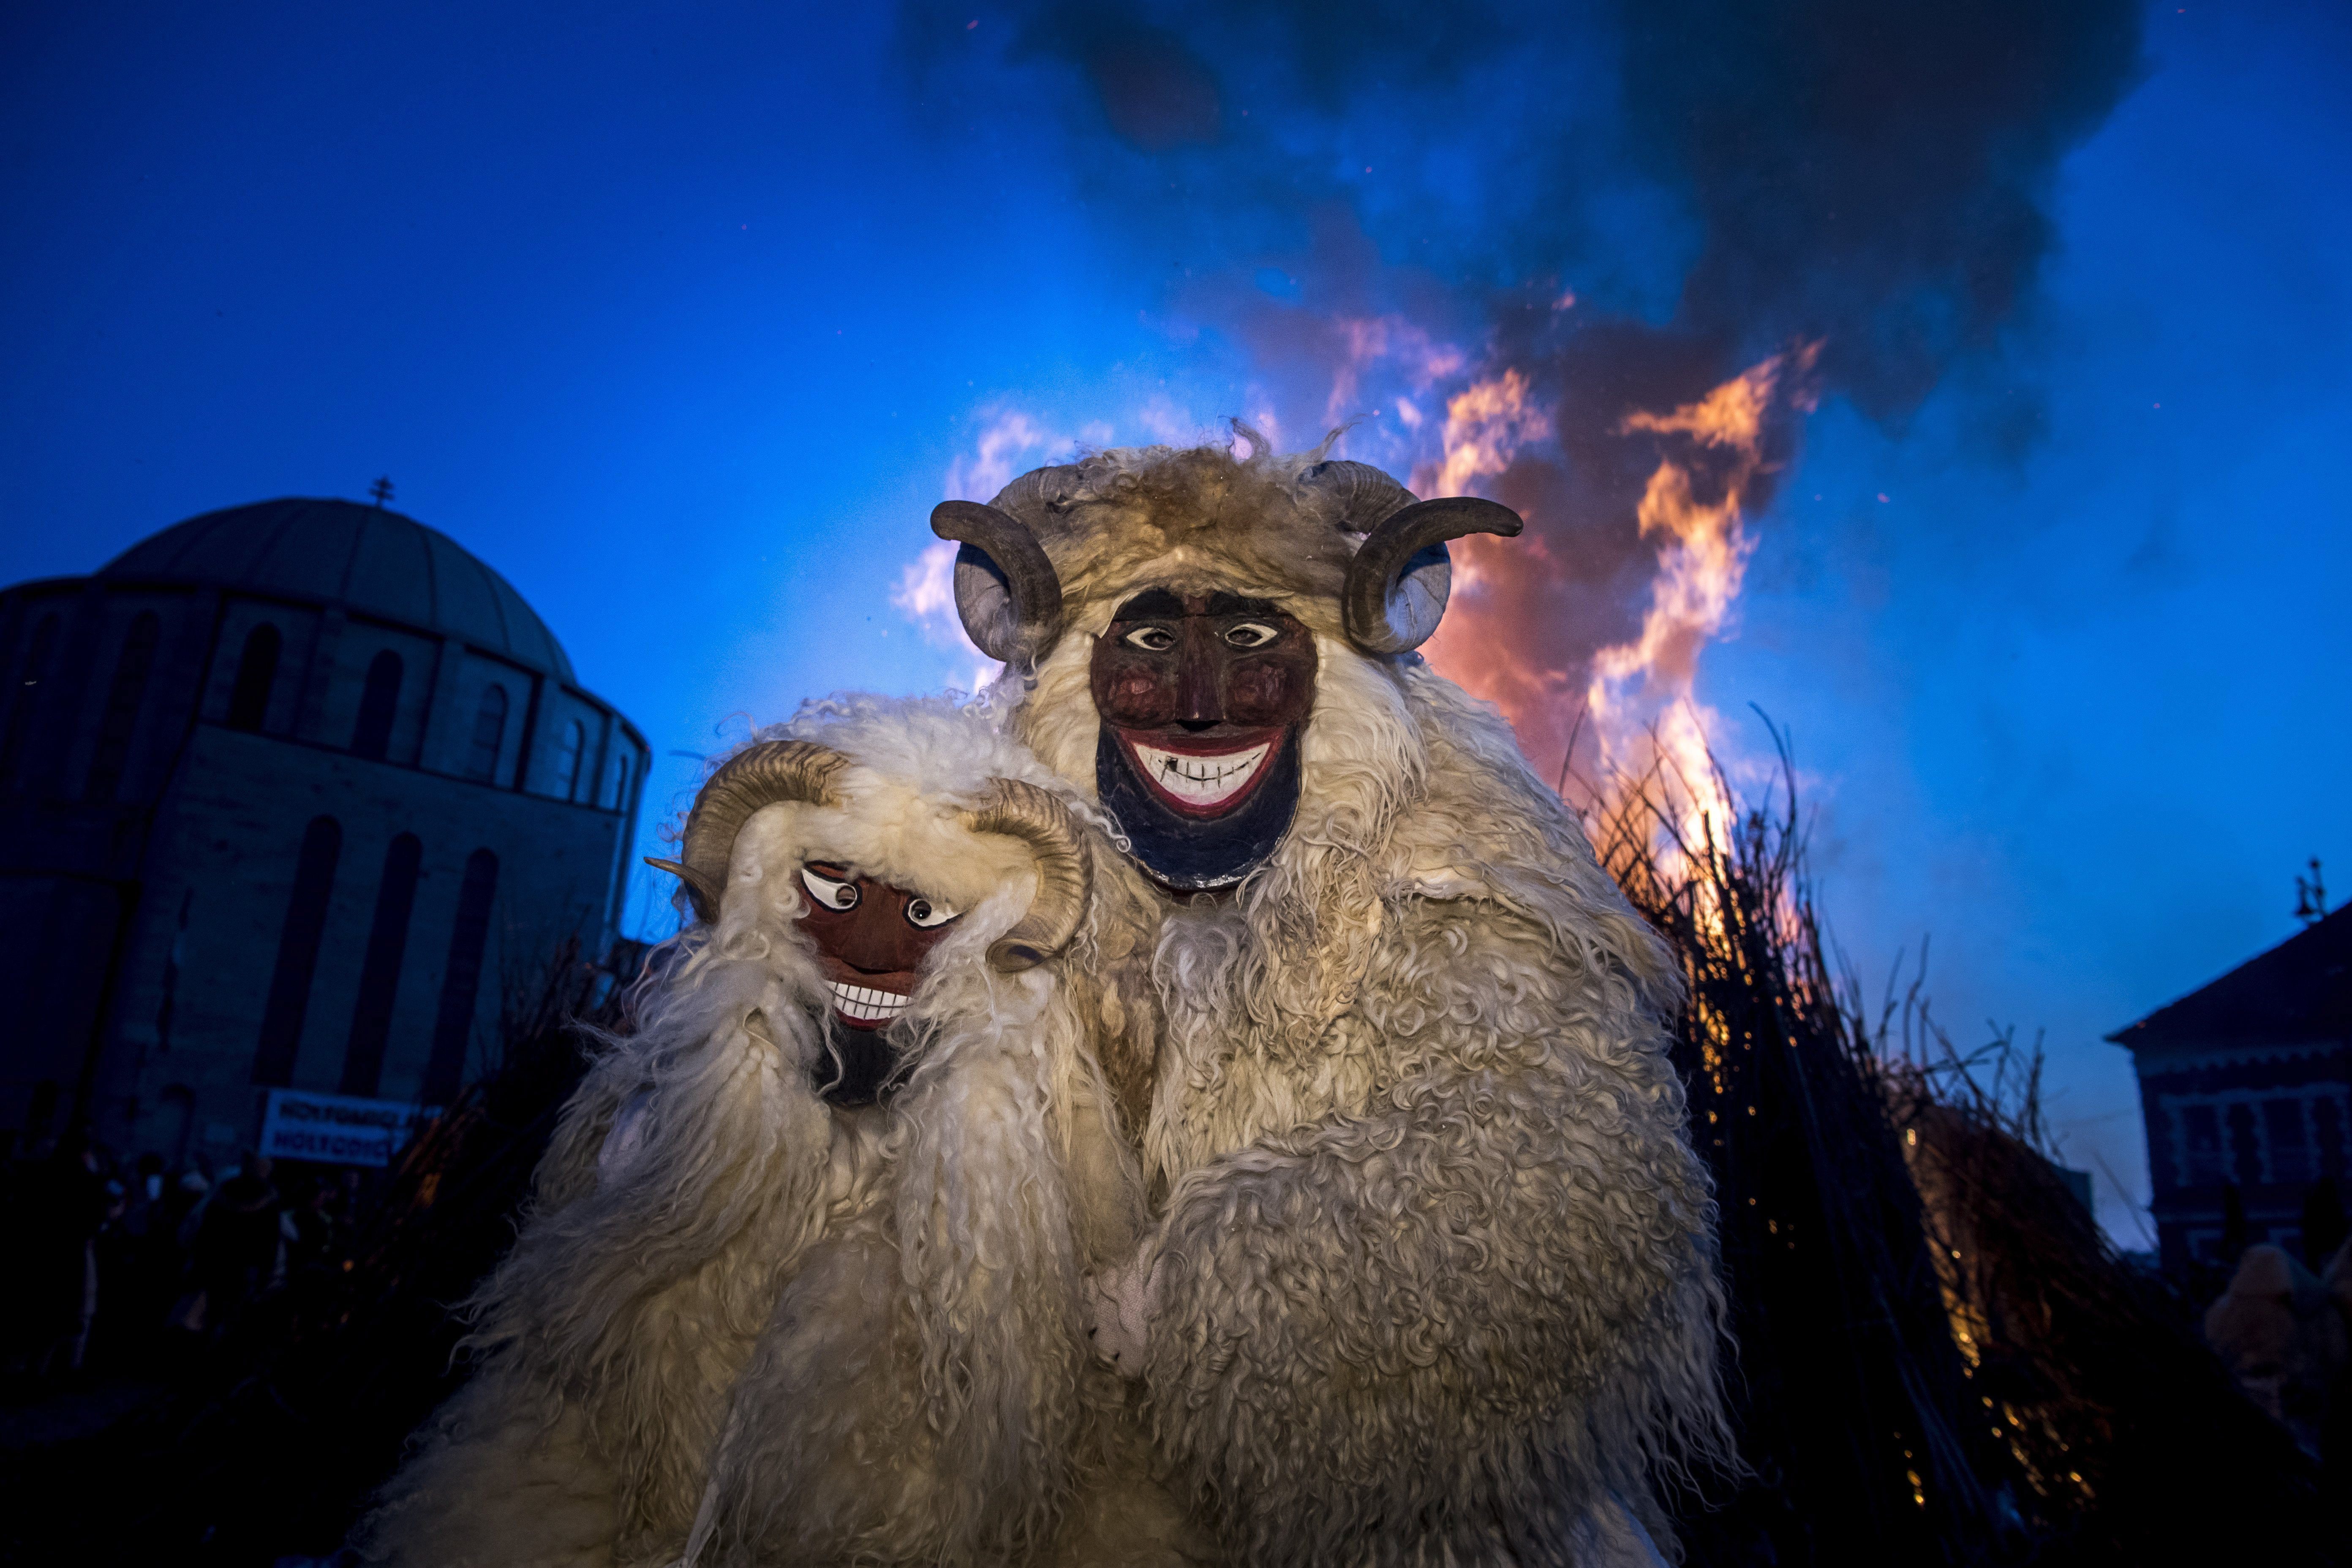 Revellers wearing a sheep wool costume with horns and a mask stand in front of a bonfire in Mohacs, some 210 kms south of Budapest, during the traditional carnival parade of the town Sunday, Feb. 11, 2018. The carnival parade of people dressed in similar costumes and frightening wooden masks, using various noisy wooden rattlers is traditionally held on the seventh weekend before Easter to drive away winter, and is a revival of a legend, which says the ethnic Croats crossed the river to ambush the Osmanli Turkish troops, who escaped in panic seeing the terrifying figures during the Turkish occupation of Hungary. (Zsolt Szigetvary/MTI via AP)